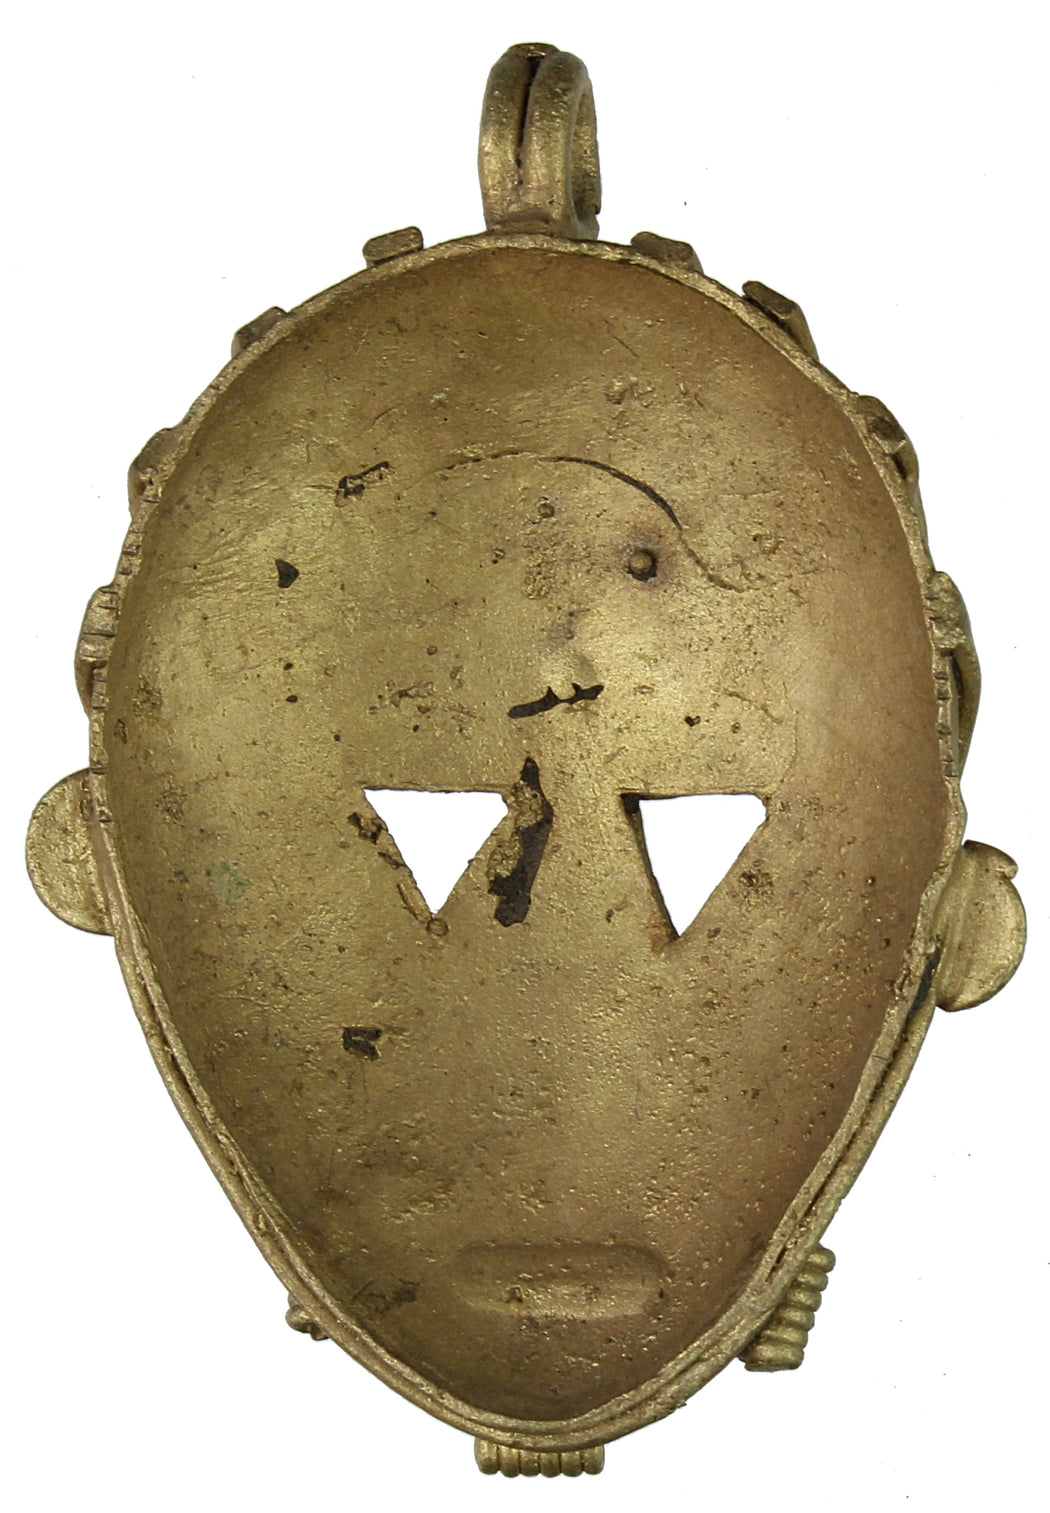 Contemporary African Brass Mask - Niger Bend